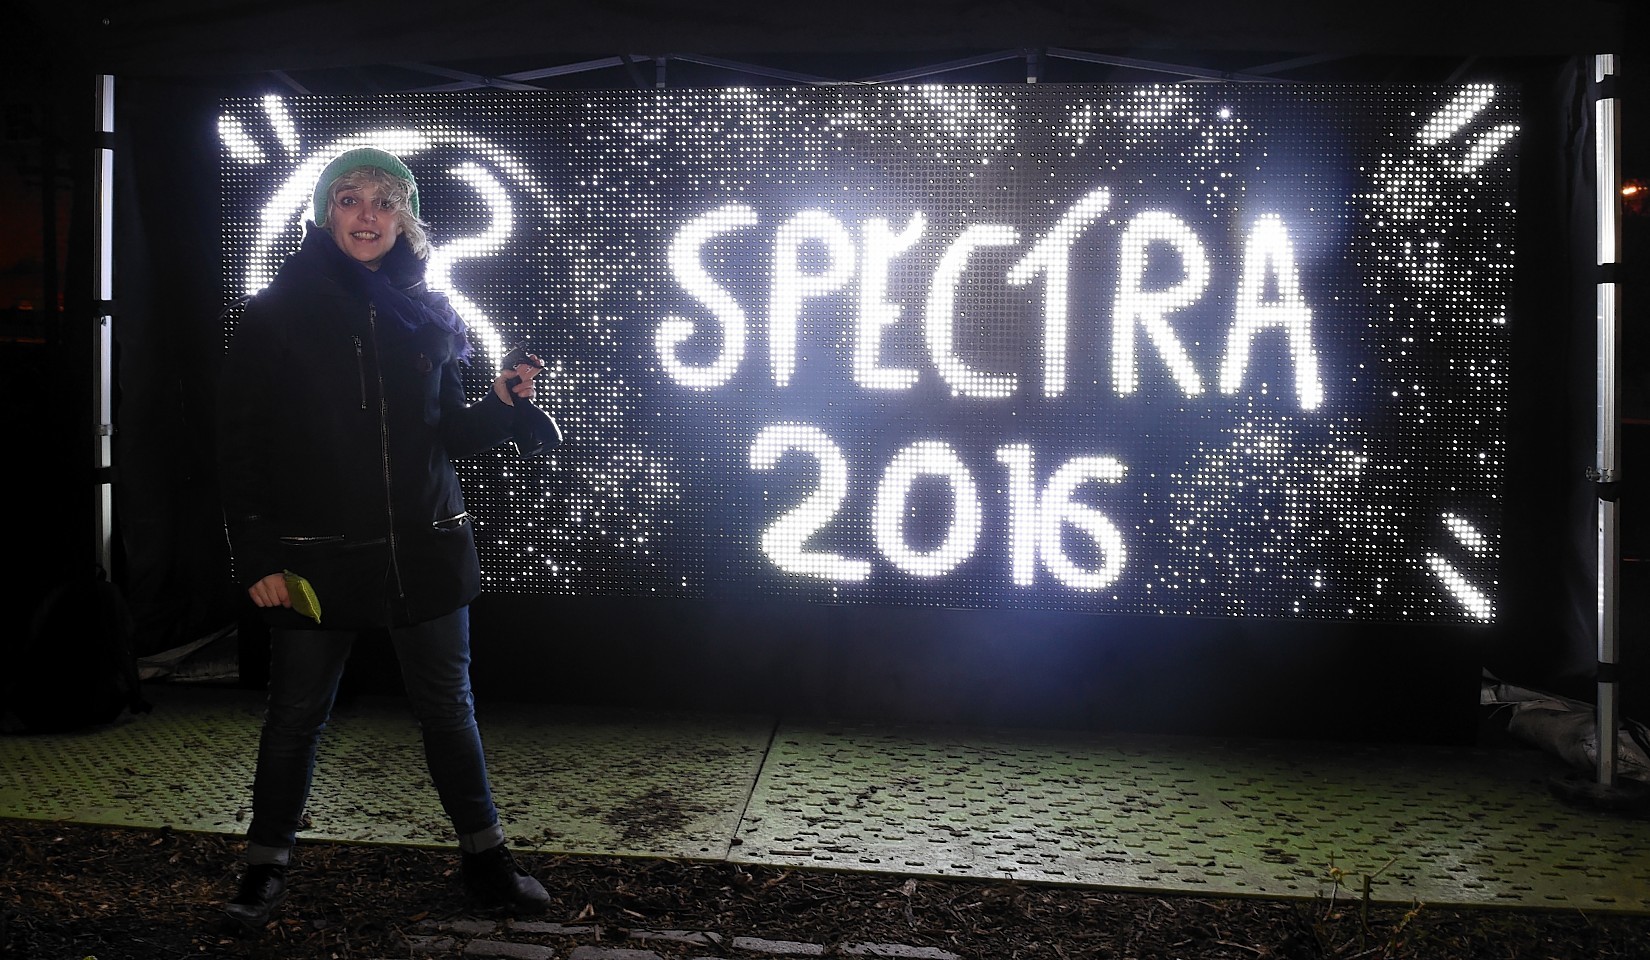 Spectra is one of the member festivals.